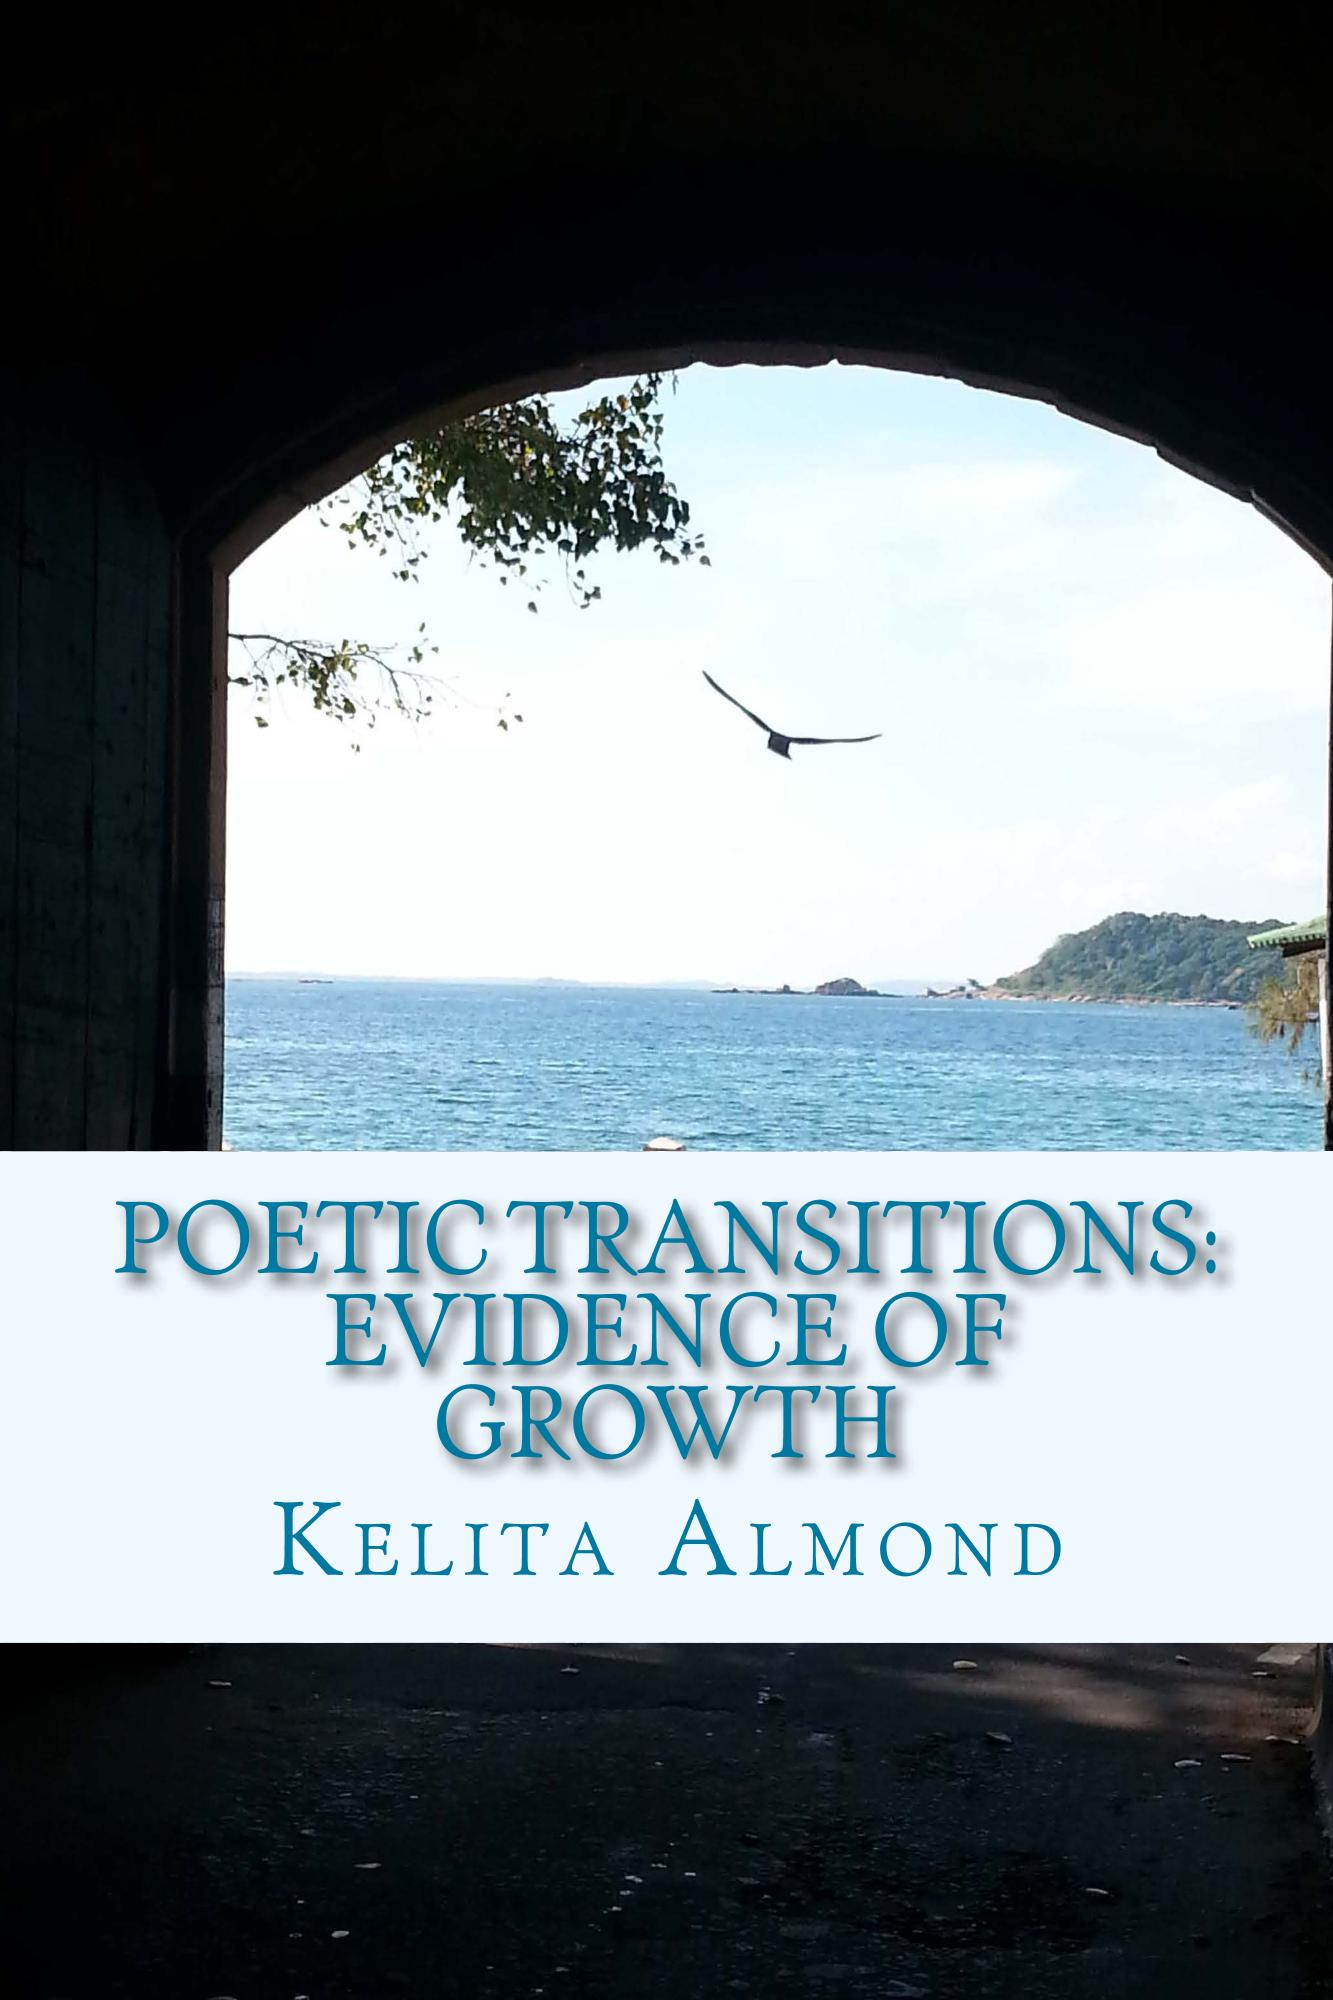 Poetic Transitions: Evidence of Growth